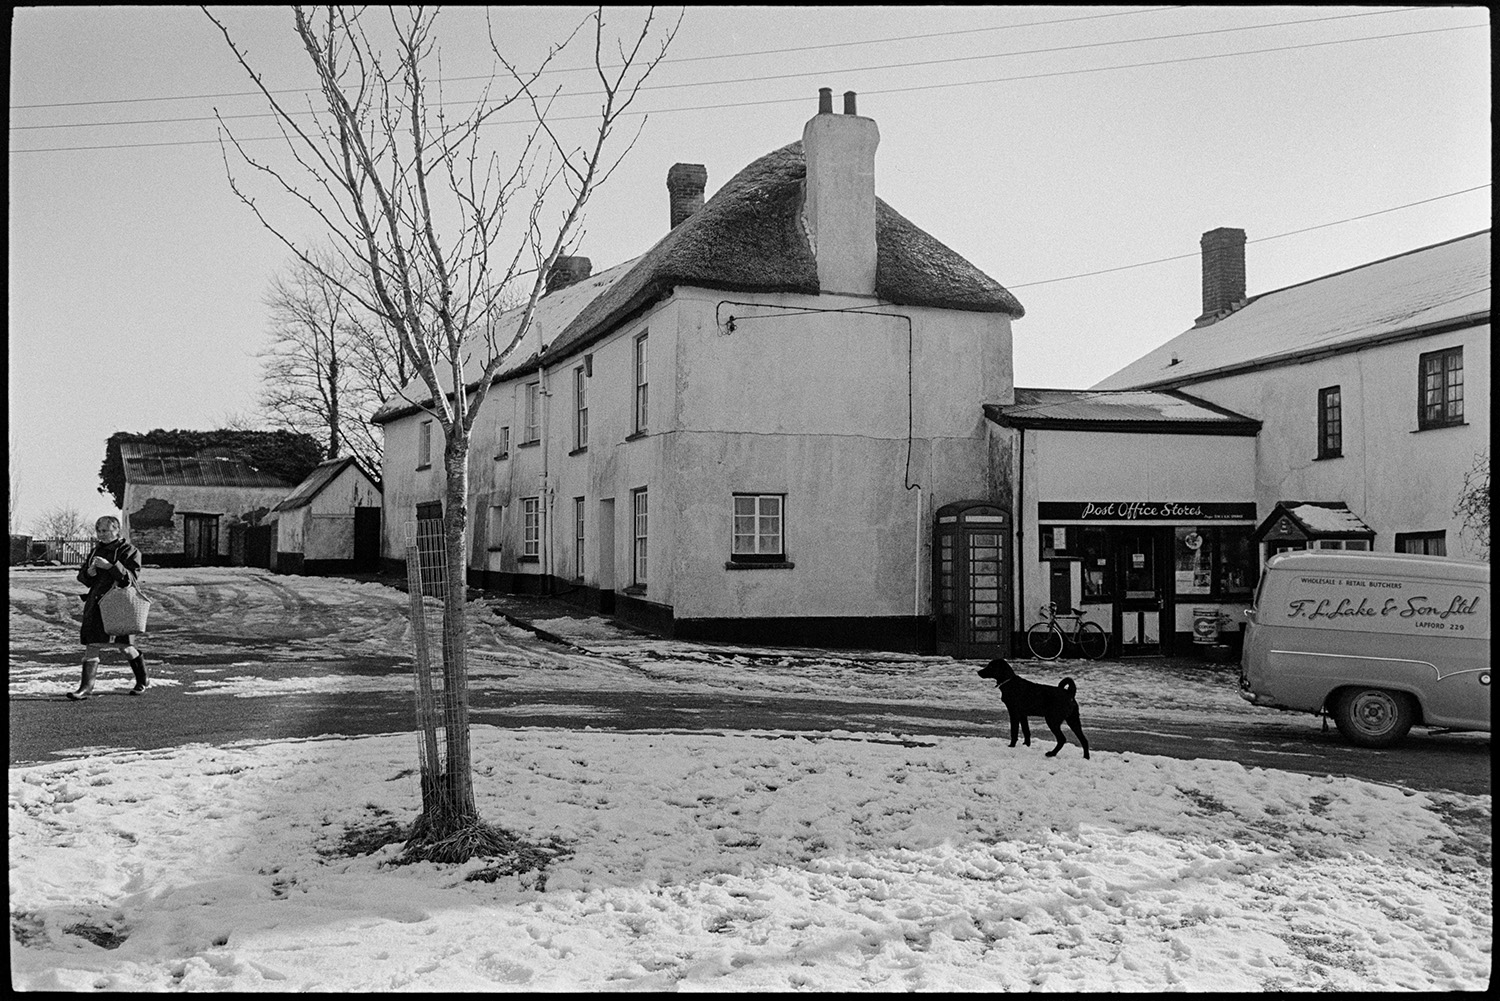 Snow, Butcher delivering meat to Post Office from van. 
[An F L Lake & Sons Ltd butcher's van parked outside the Post Office in Coldridge. A bicycle and telephone box are outside the shop front; and a person and a dog are walking past on the snowy street outside.]